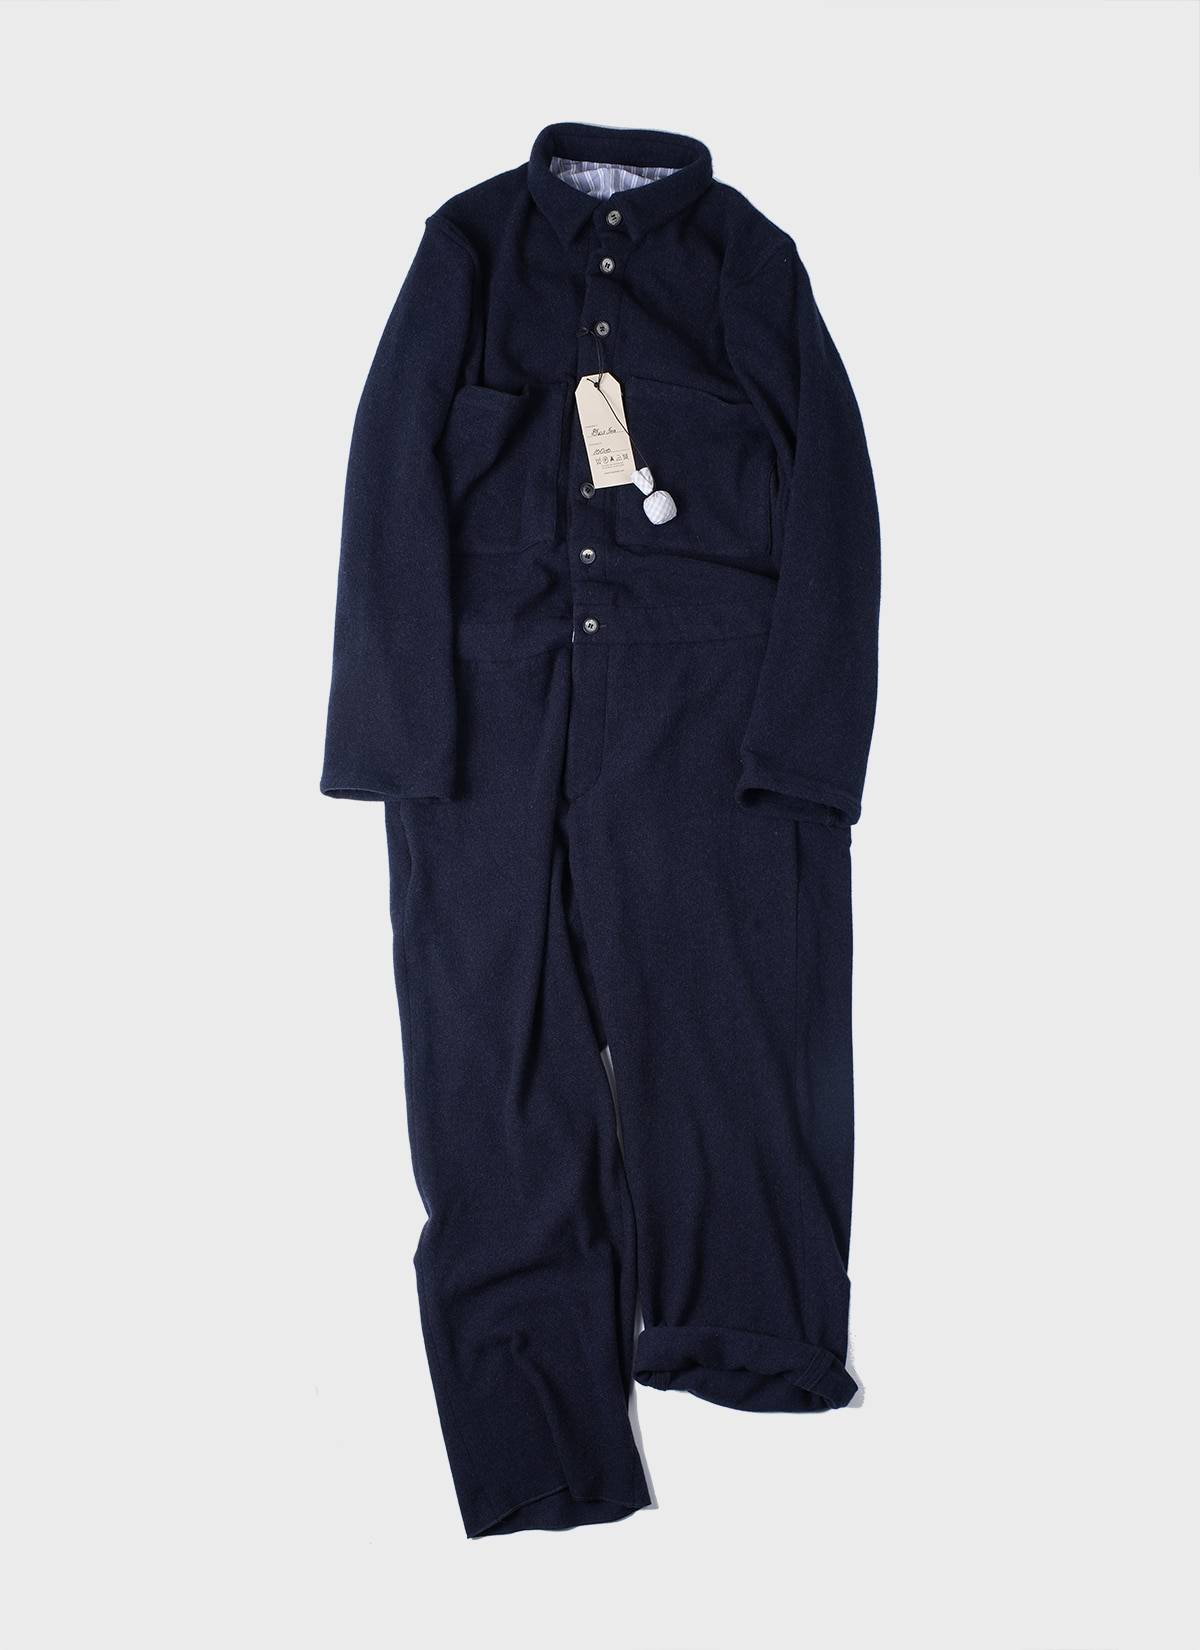 Overall Black Navy